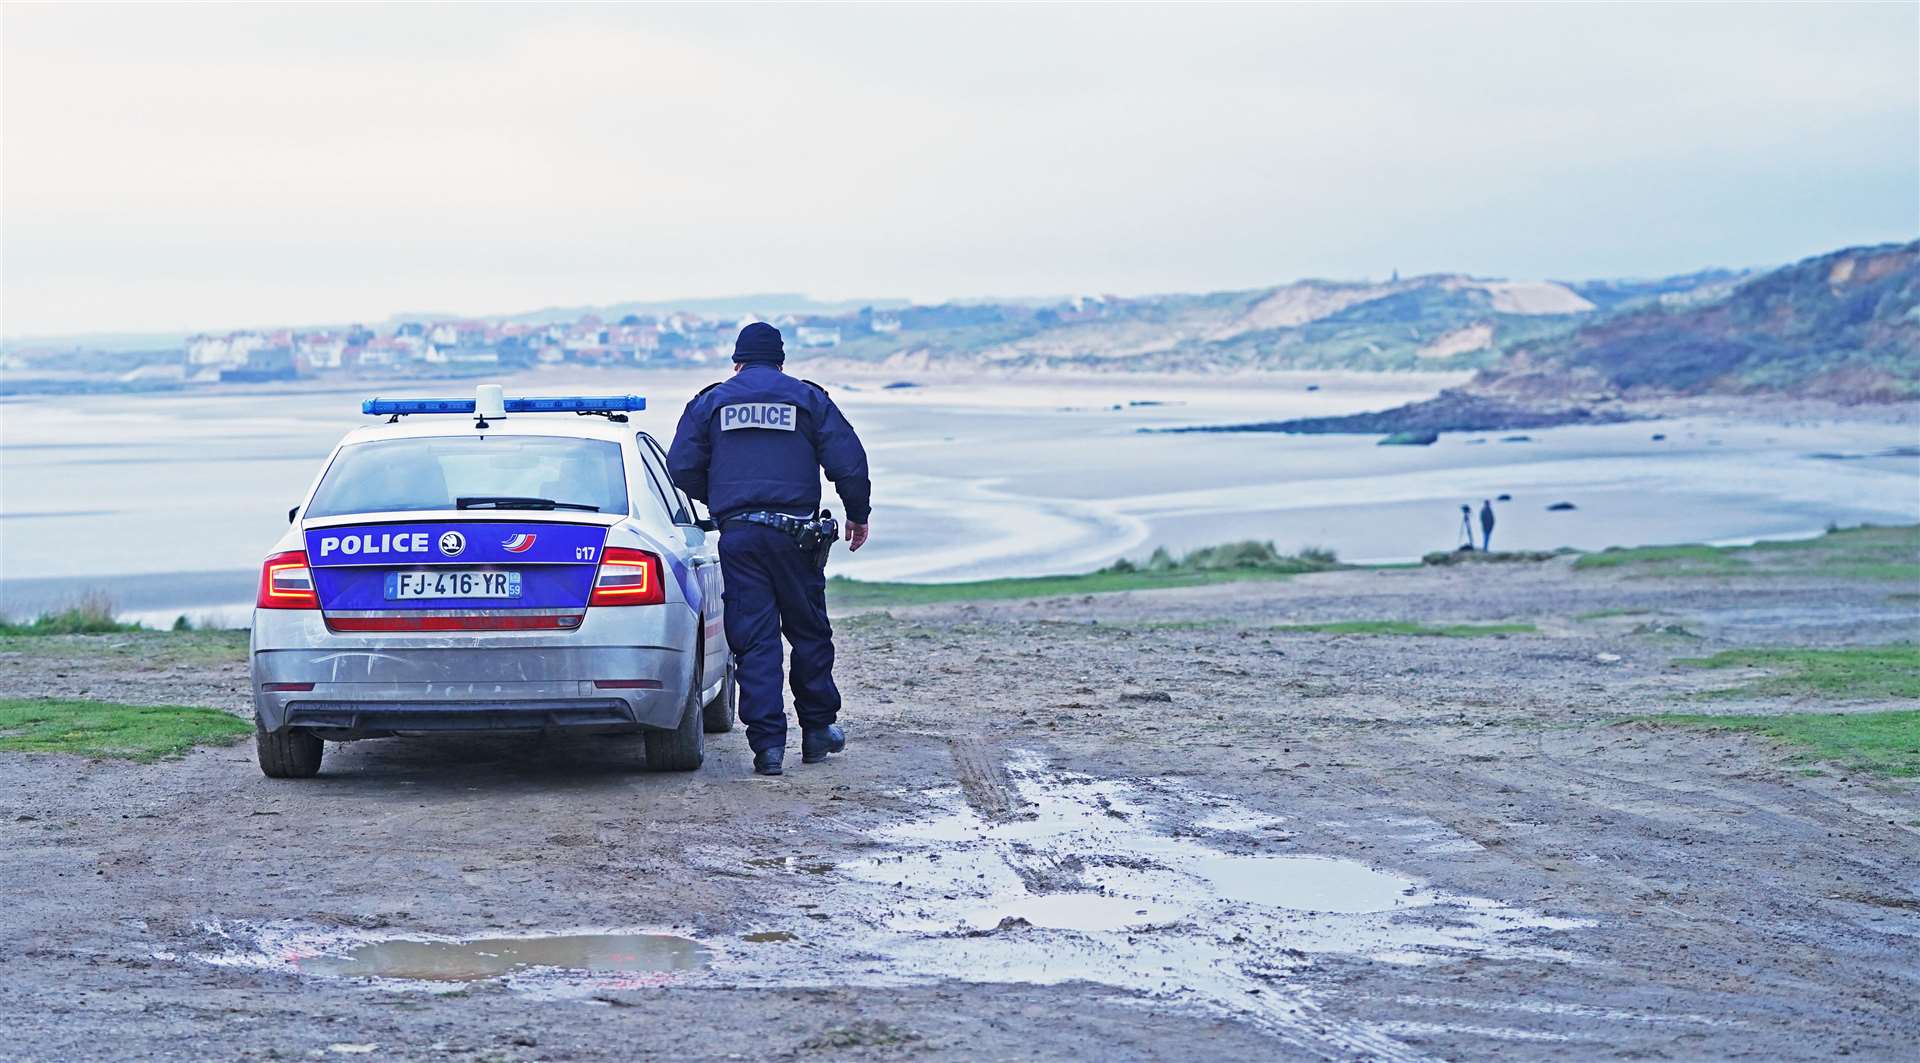 French police look out over the coast at Wimereux, north of Boulogne, at a stretch of beach believed to be used by migrants seeking to cross the English Channel (Stefan Rousseau/PA)